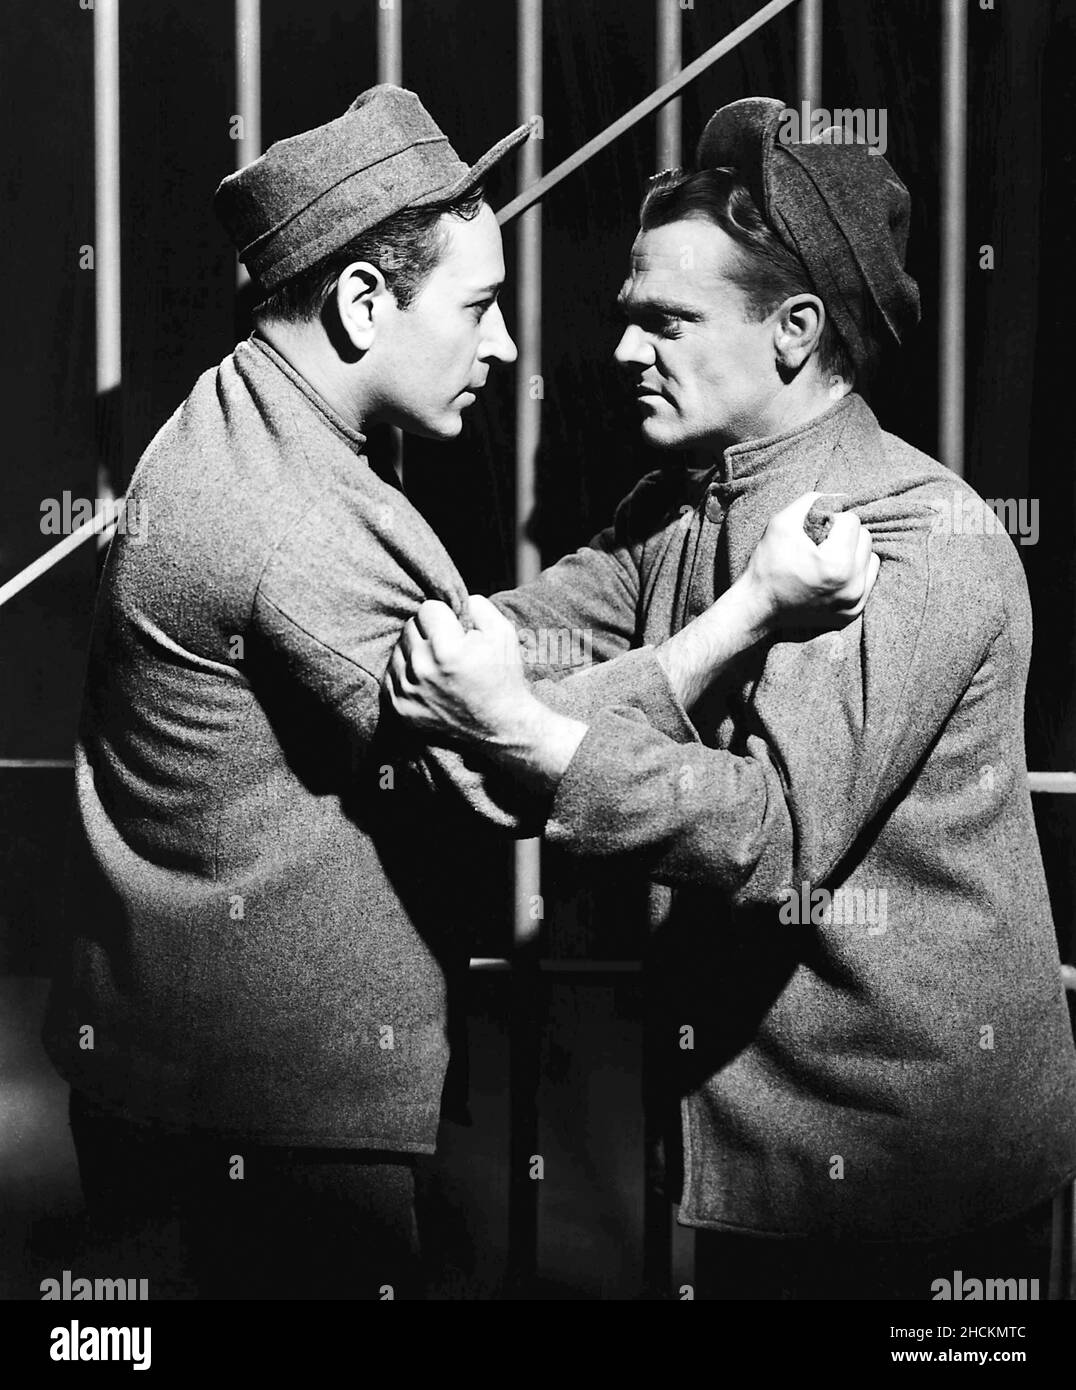 JAMES CAGNEY and GEORGE RAFT in EACH DAWN I DIE (1939), directed by WILLIAM KEIGHLEY. Credit: WARNER BROTHERS / Album Stock Photo